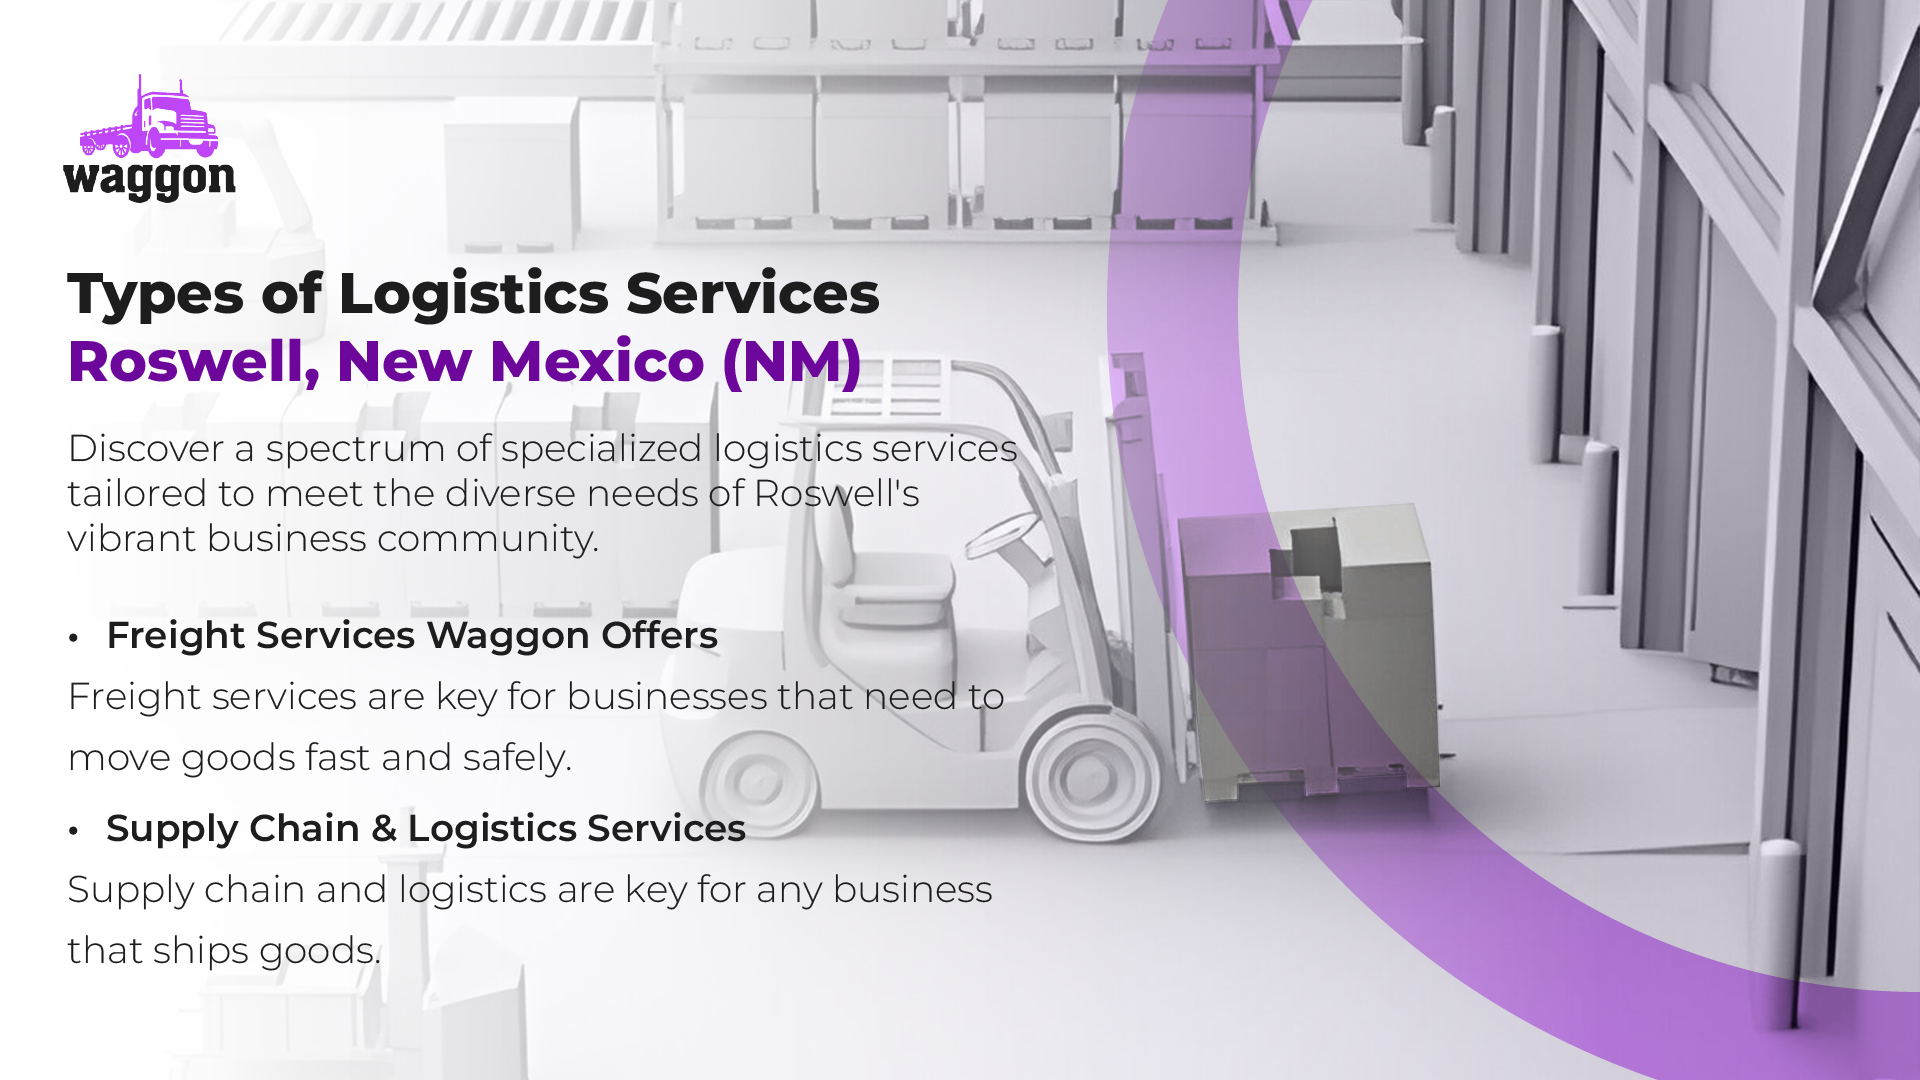 Types of Logistics Services in Roswell, New Mexico (NM)